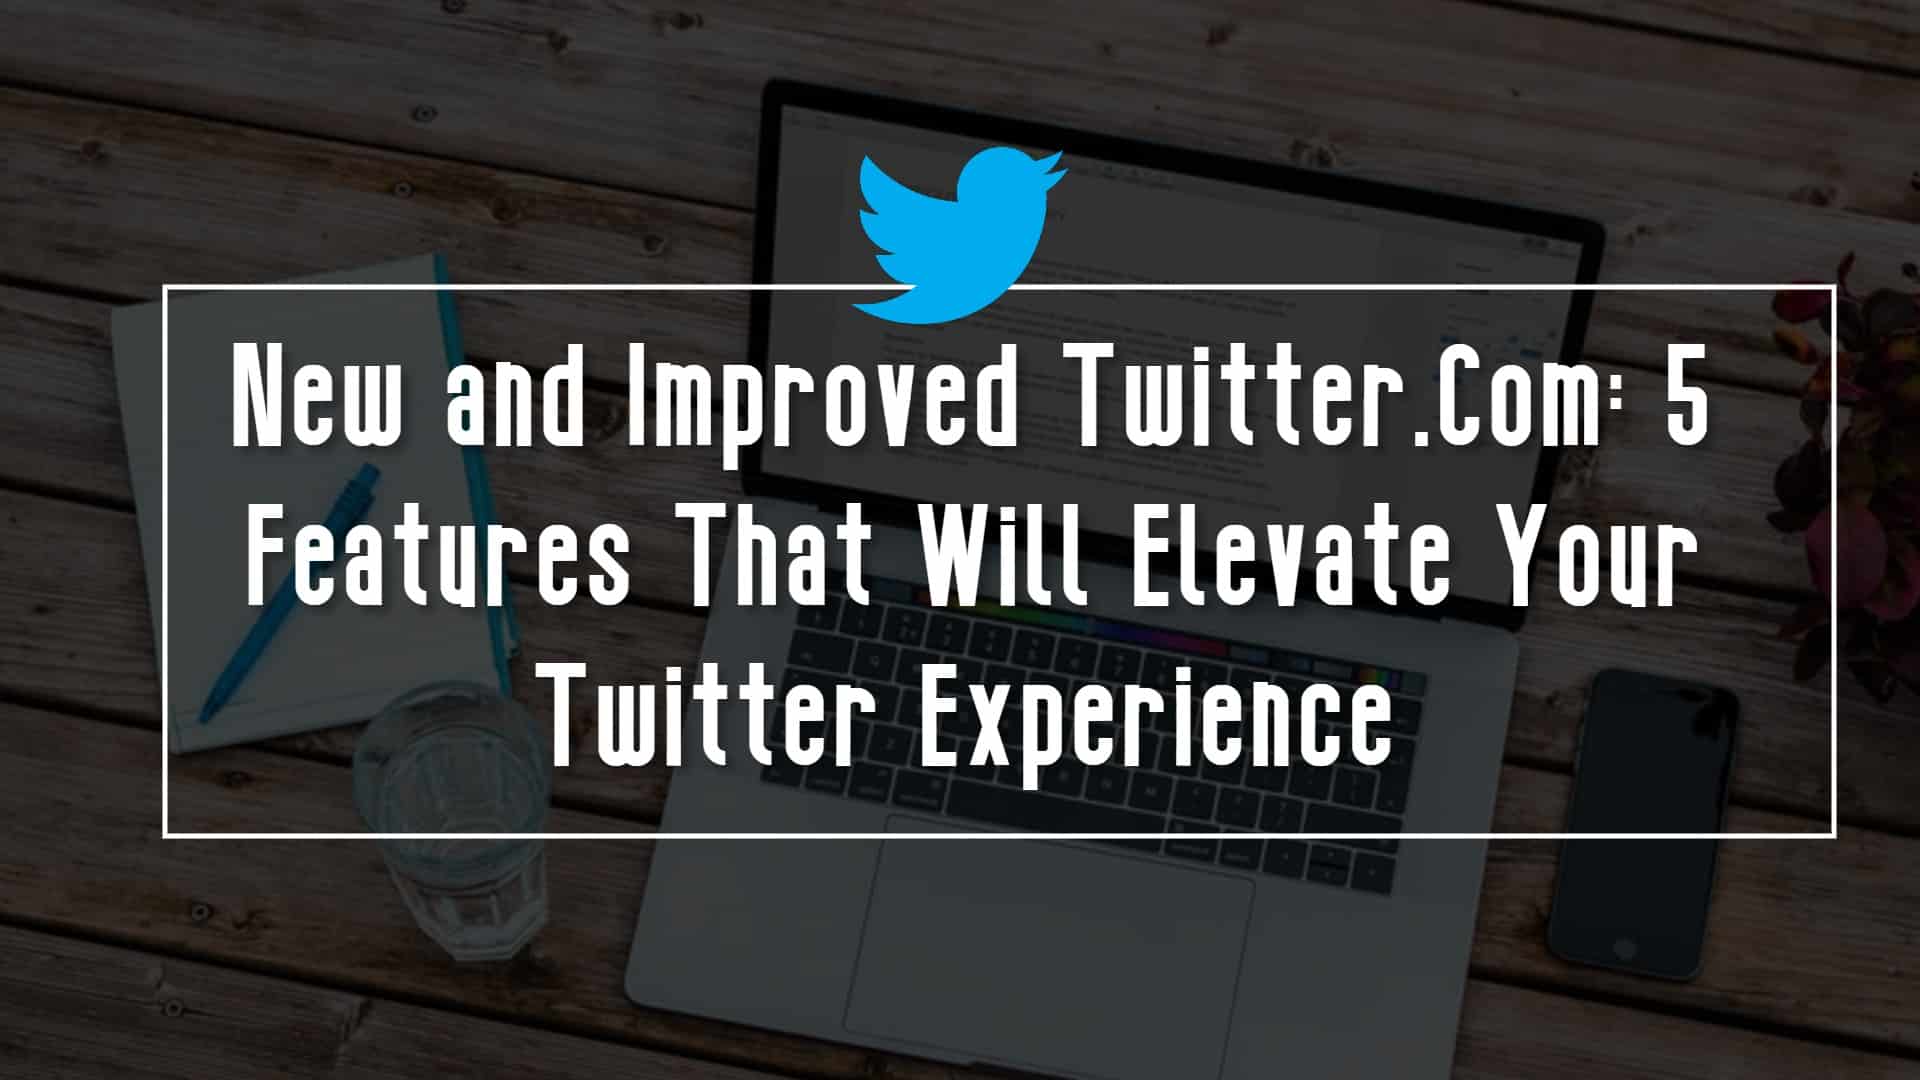 New and Improved Twitter.Com: 5 Features That Will Elevate Your Twitter Experience